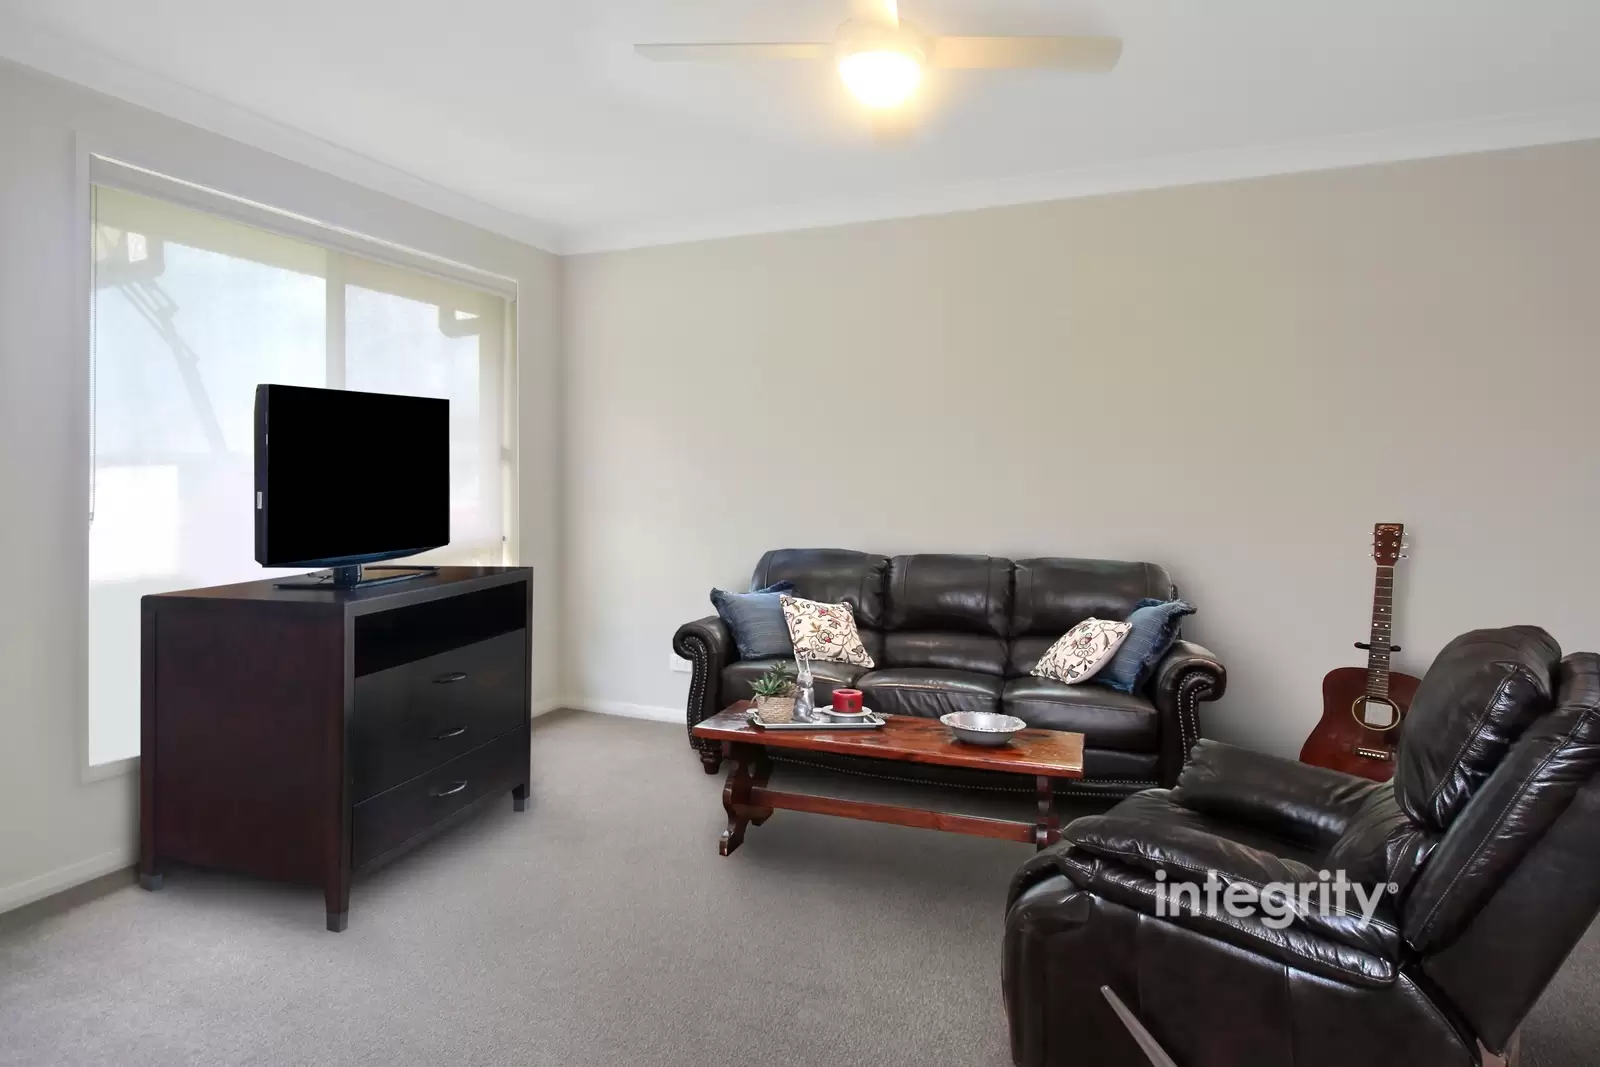 9A Elian Crescent, South Nowra Sold by Integrity Real Estate - image 2